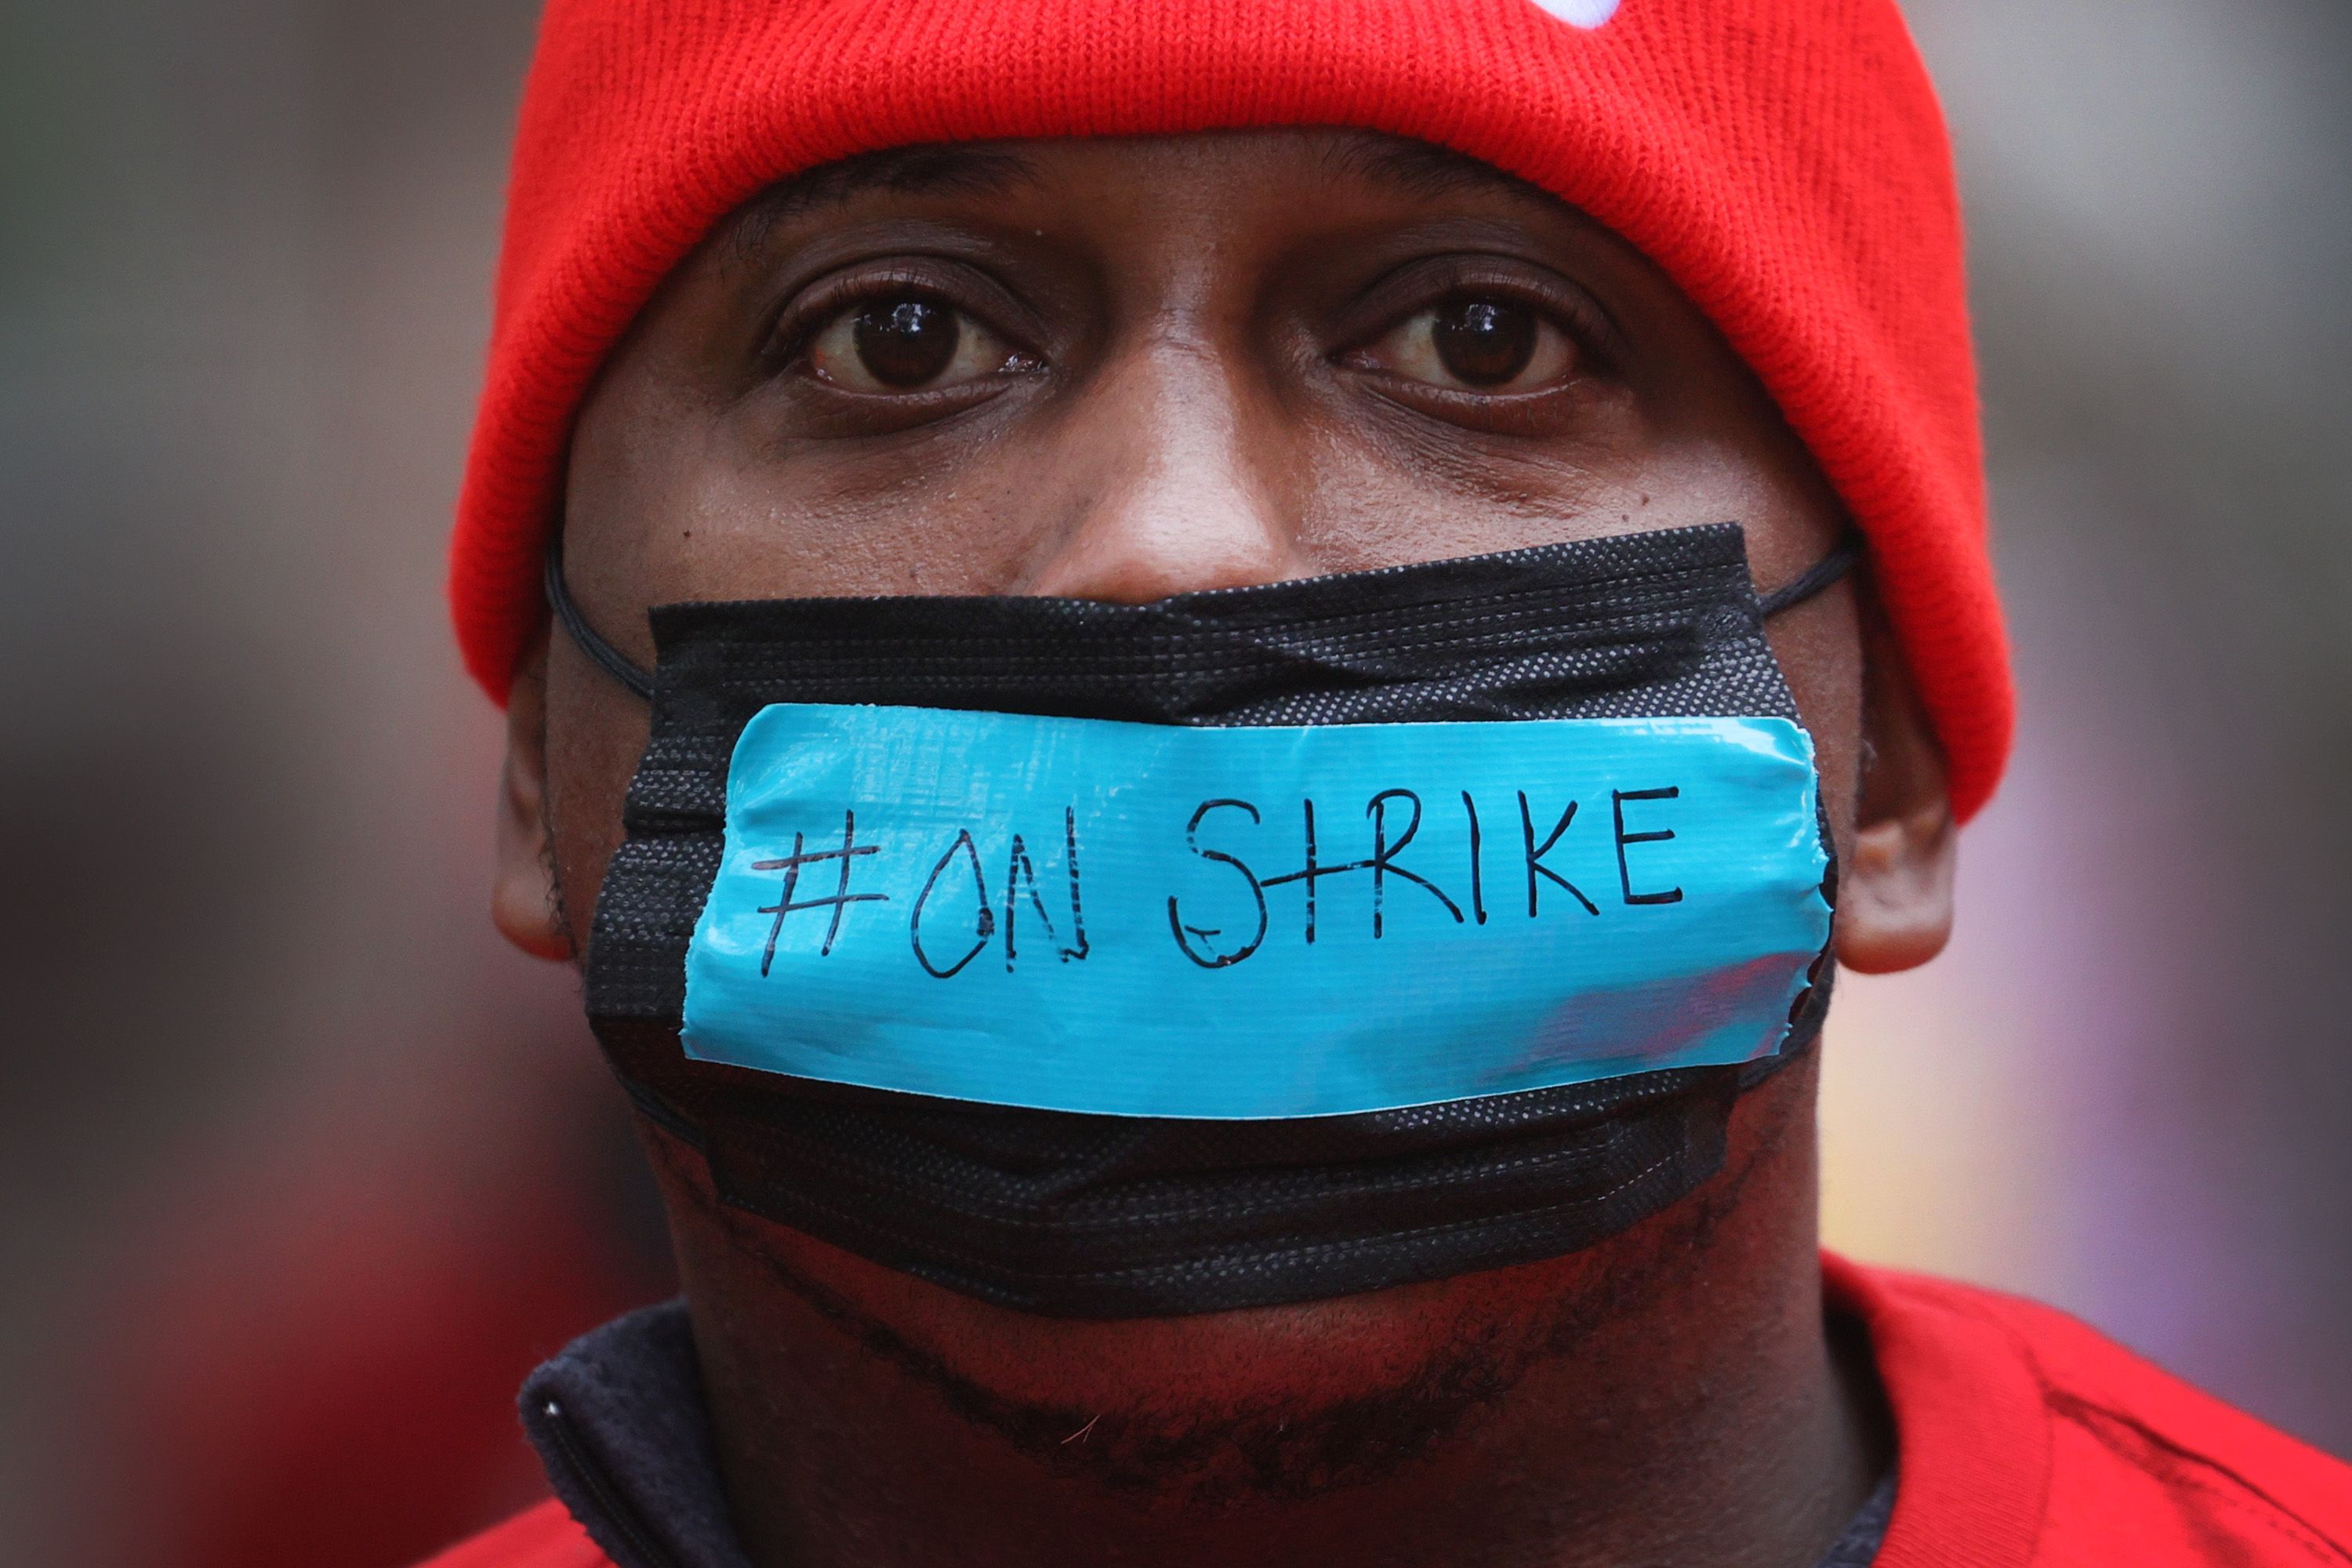 A person wears a face mask that reads: “#On Strike”.